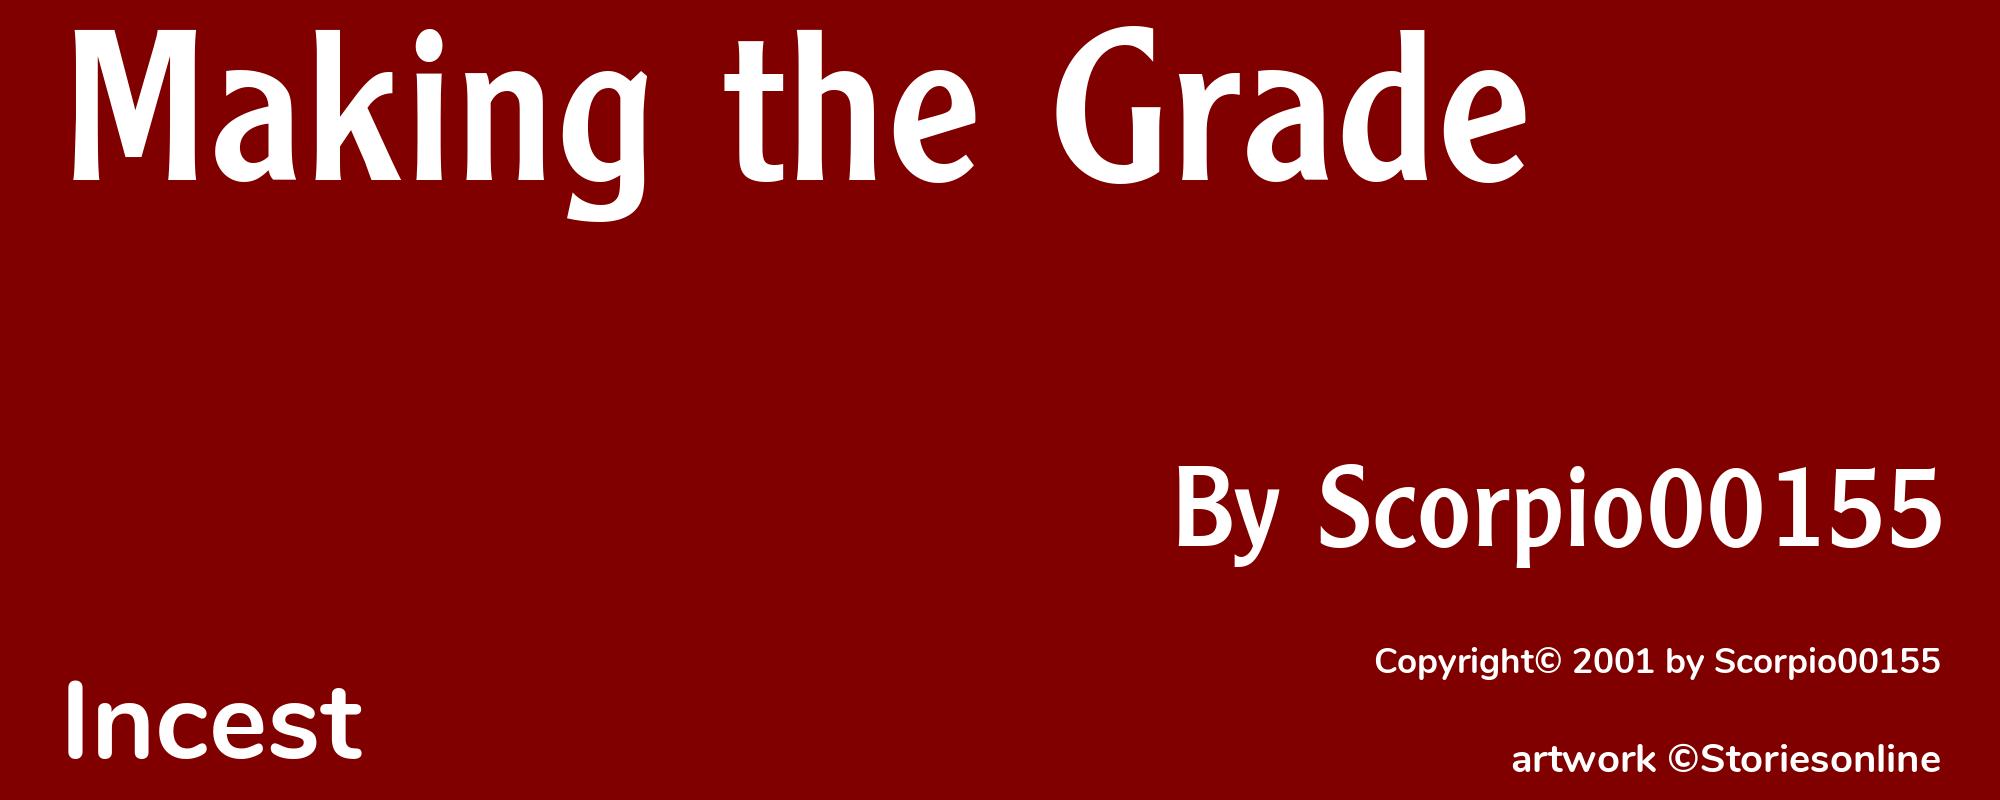 Making the Grade - Cover